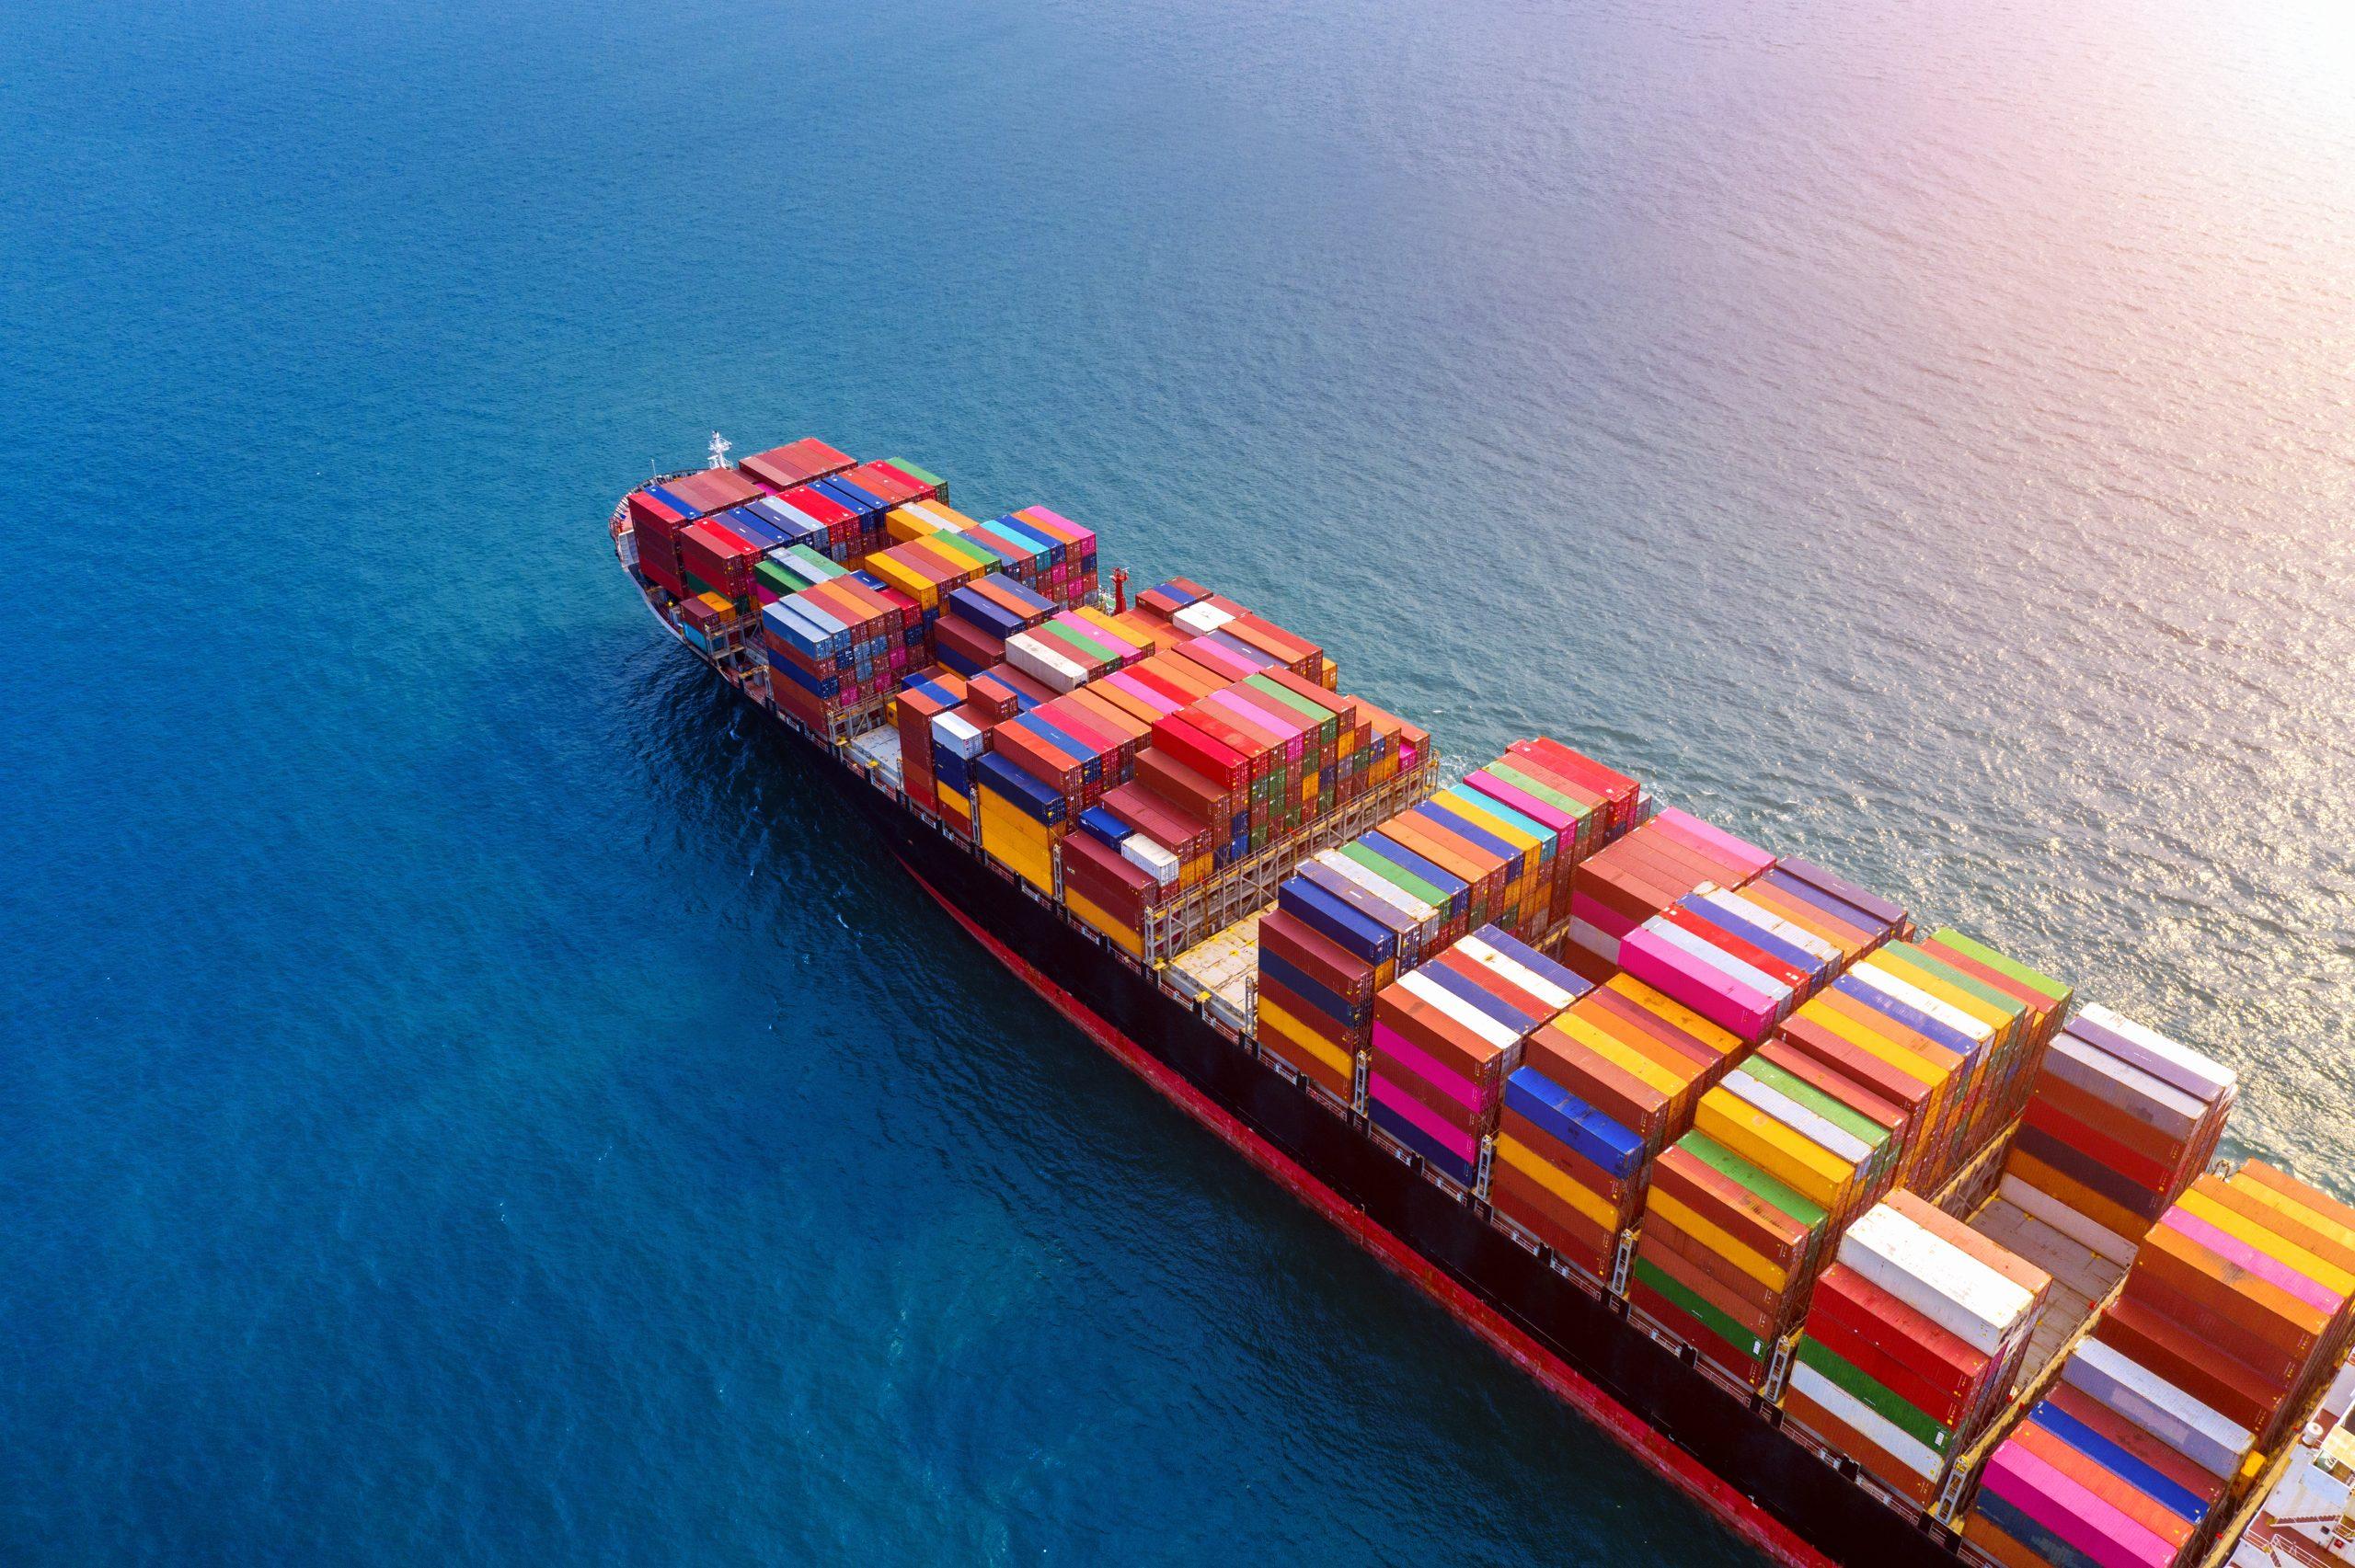 . In addition, Vessel iQ provides access to one of the largest maritime port databases globally, with over 21,000 ports and detailed information on location, code, country, type, area location, and more.